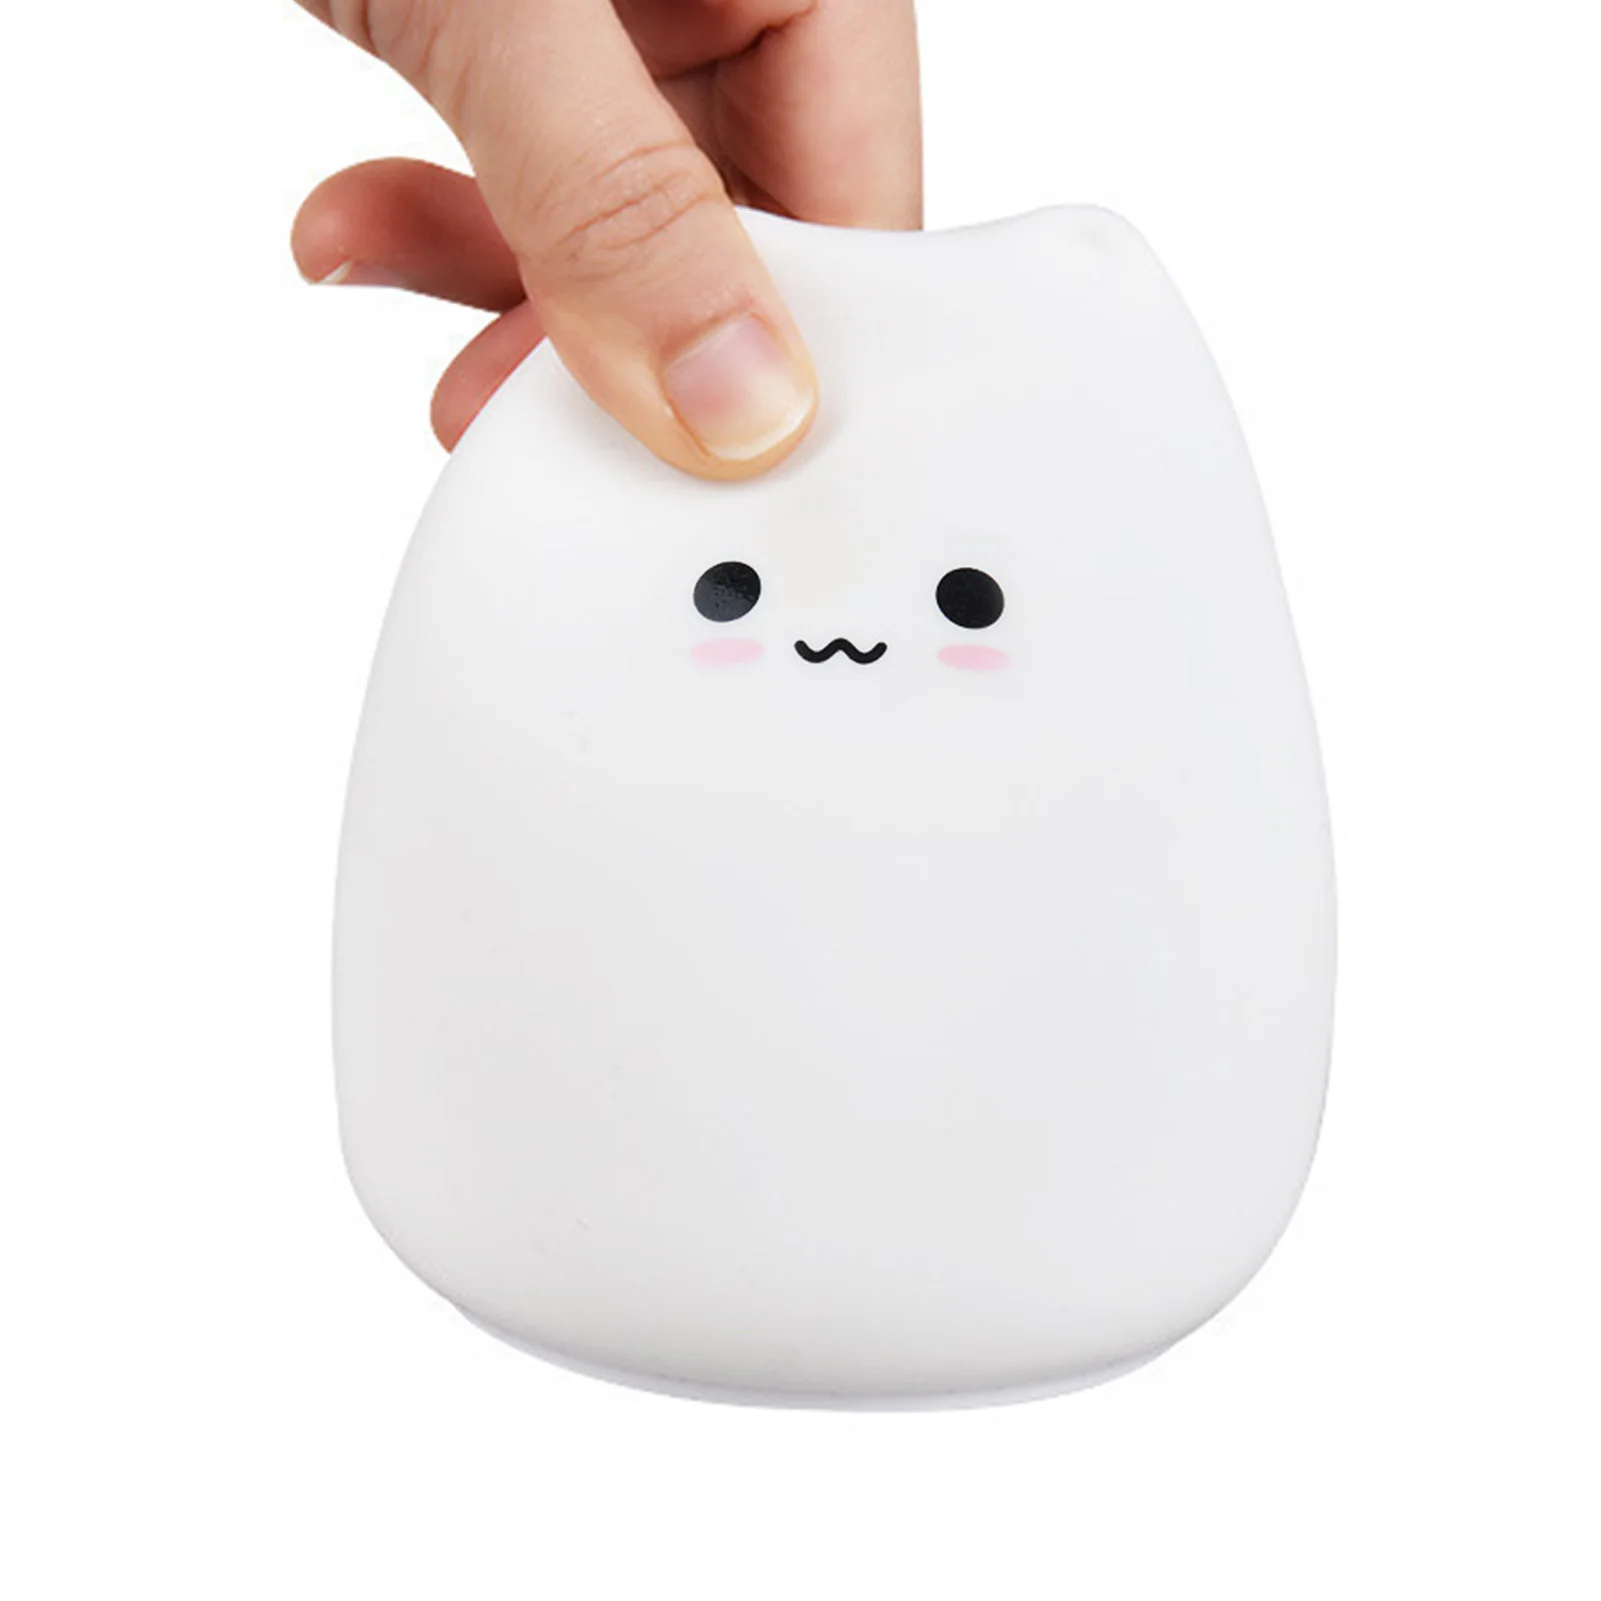 

Silicone Soft Cat Lamp Battery Powered Cat Lamp Silicone Gifts For Teen Girls Women Night Light With Tap Control Battery Powered